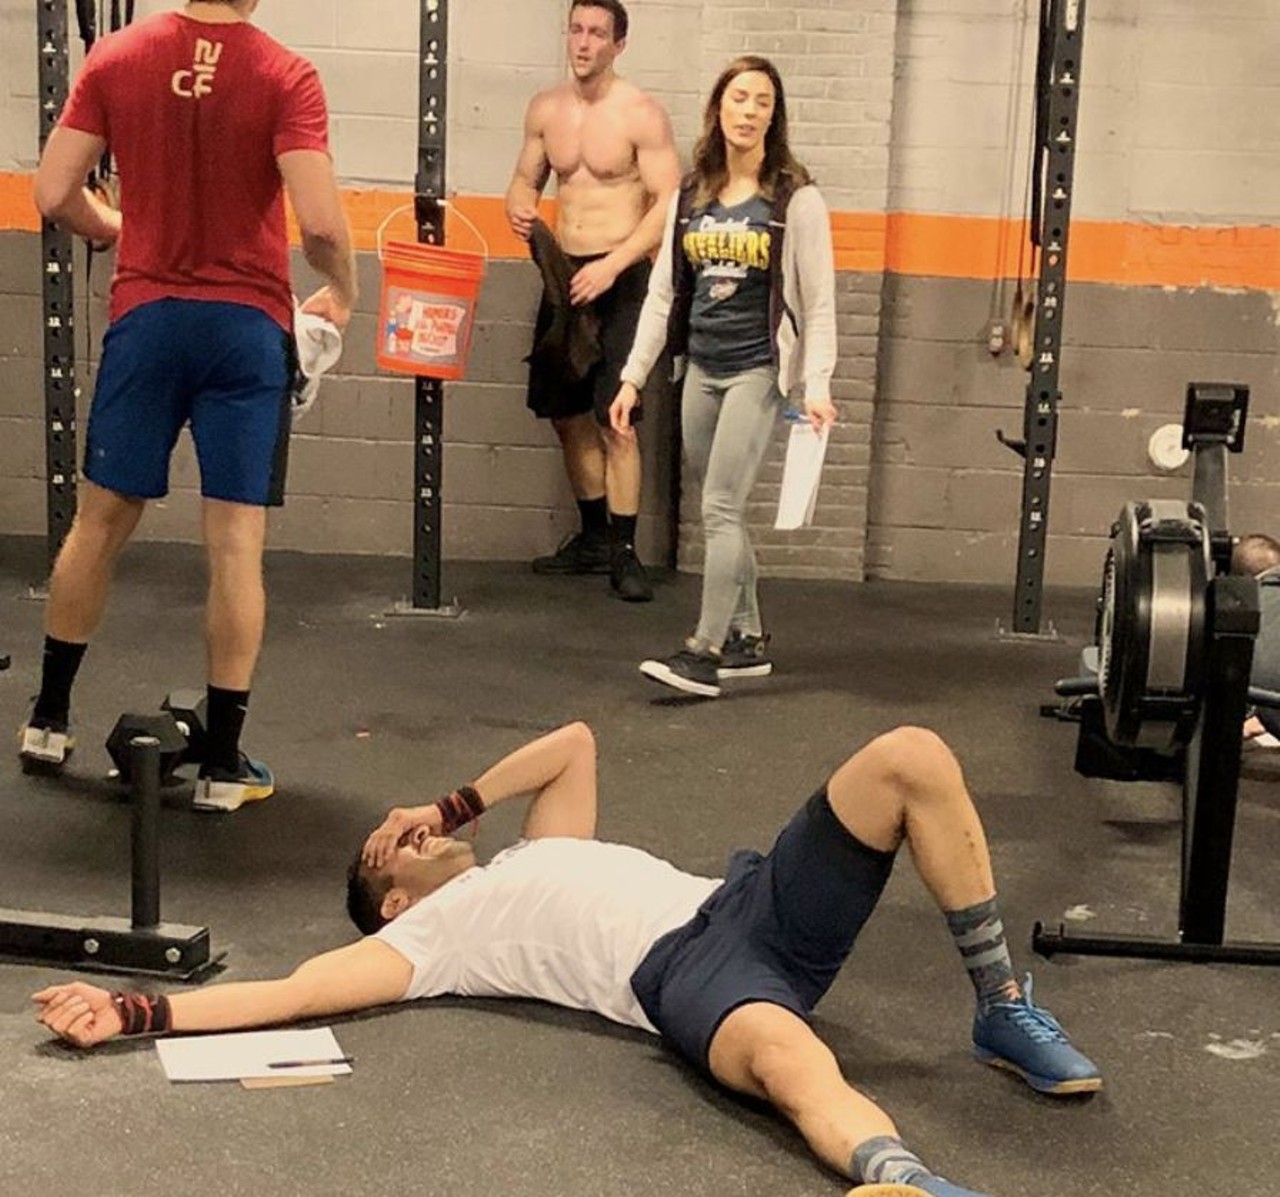 The gym
Did you set a PR? Did you just get dumped? Are you just flowing with emotions after doing all those exercises? Let everyone wonder
Photo via  Bobahar/Instagram